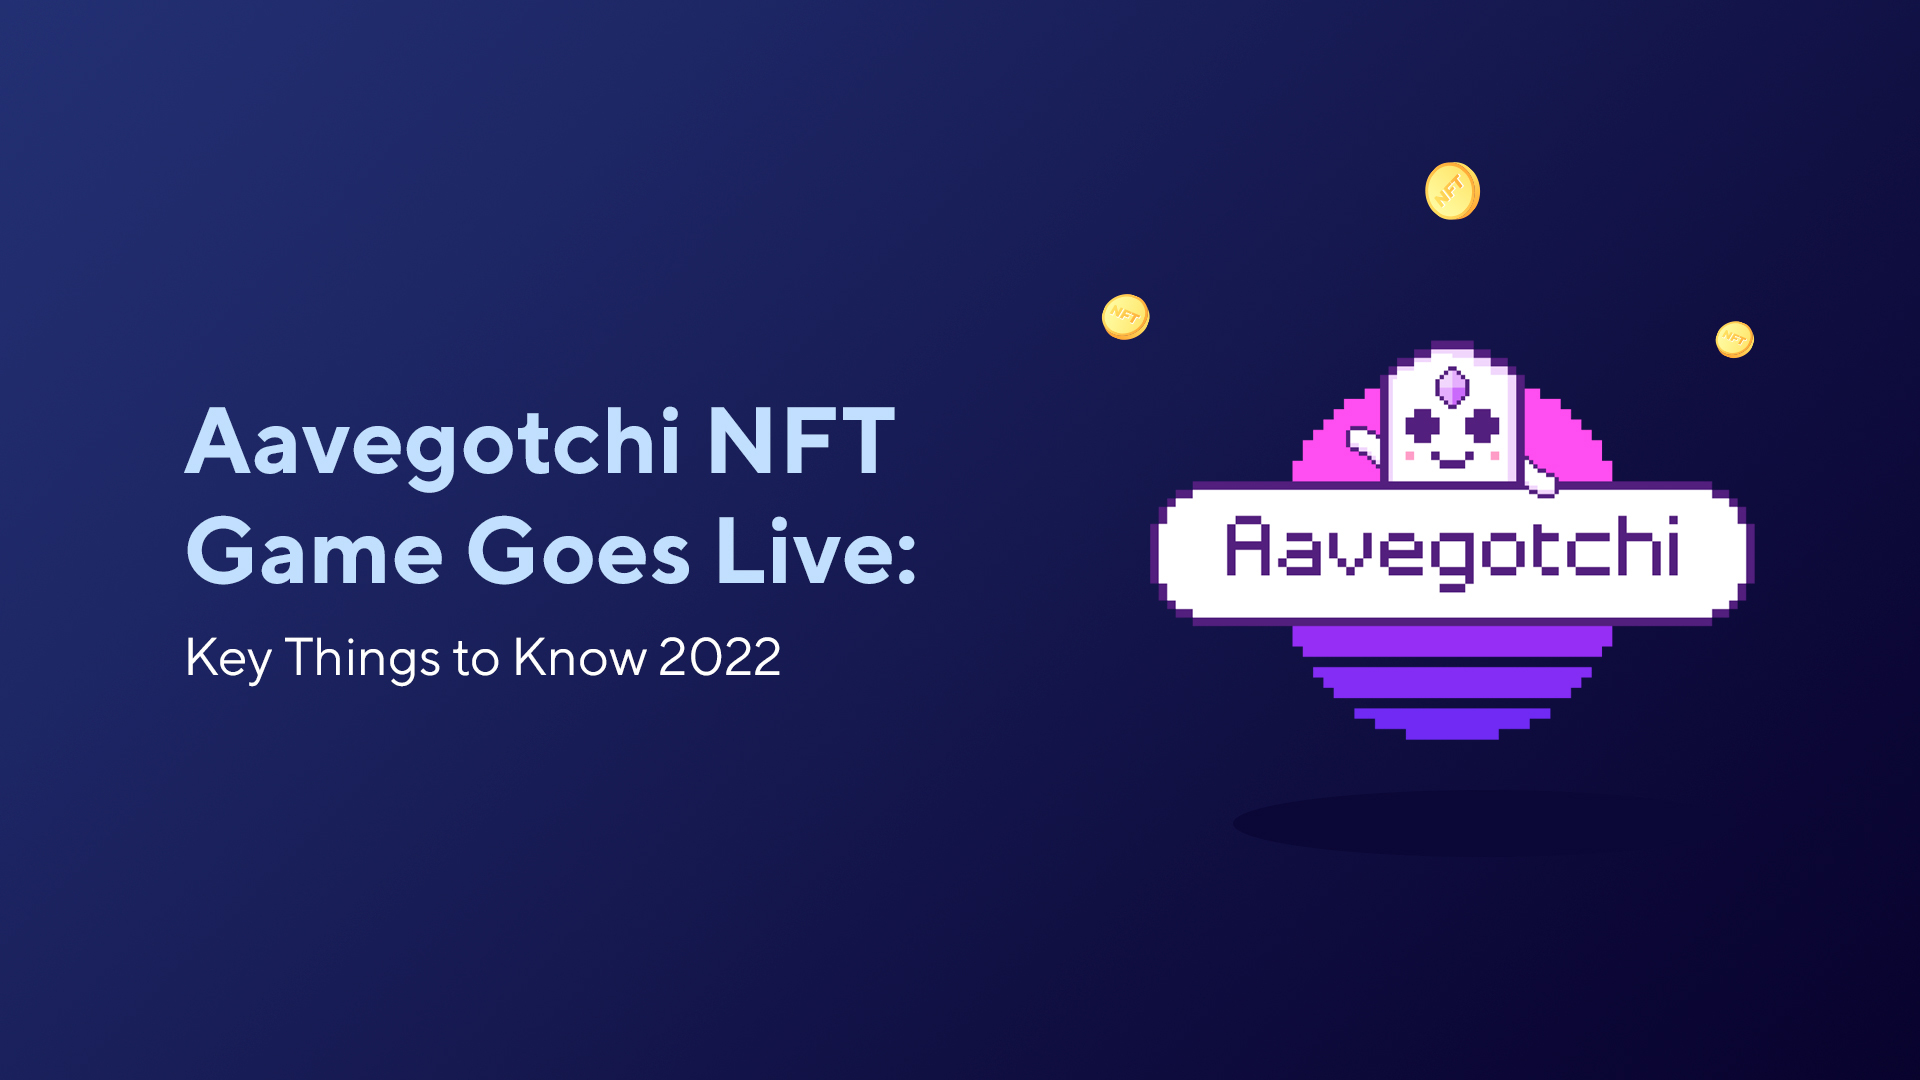 Aavegotchi NFT Game Goes Live: Key Things to Know 2022